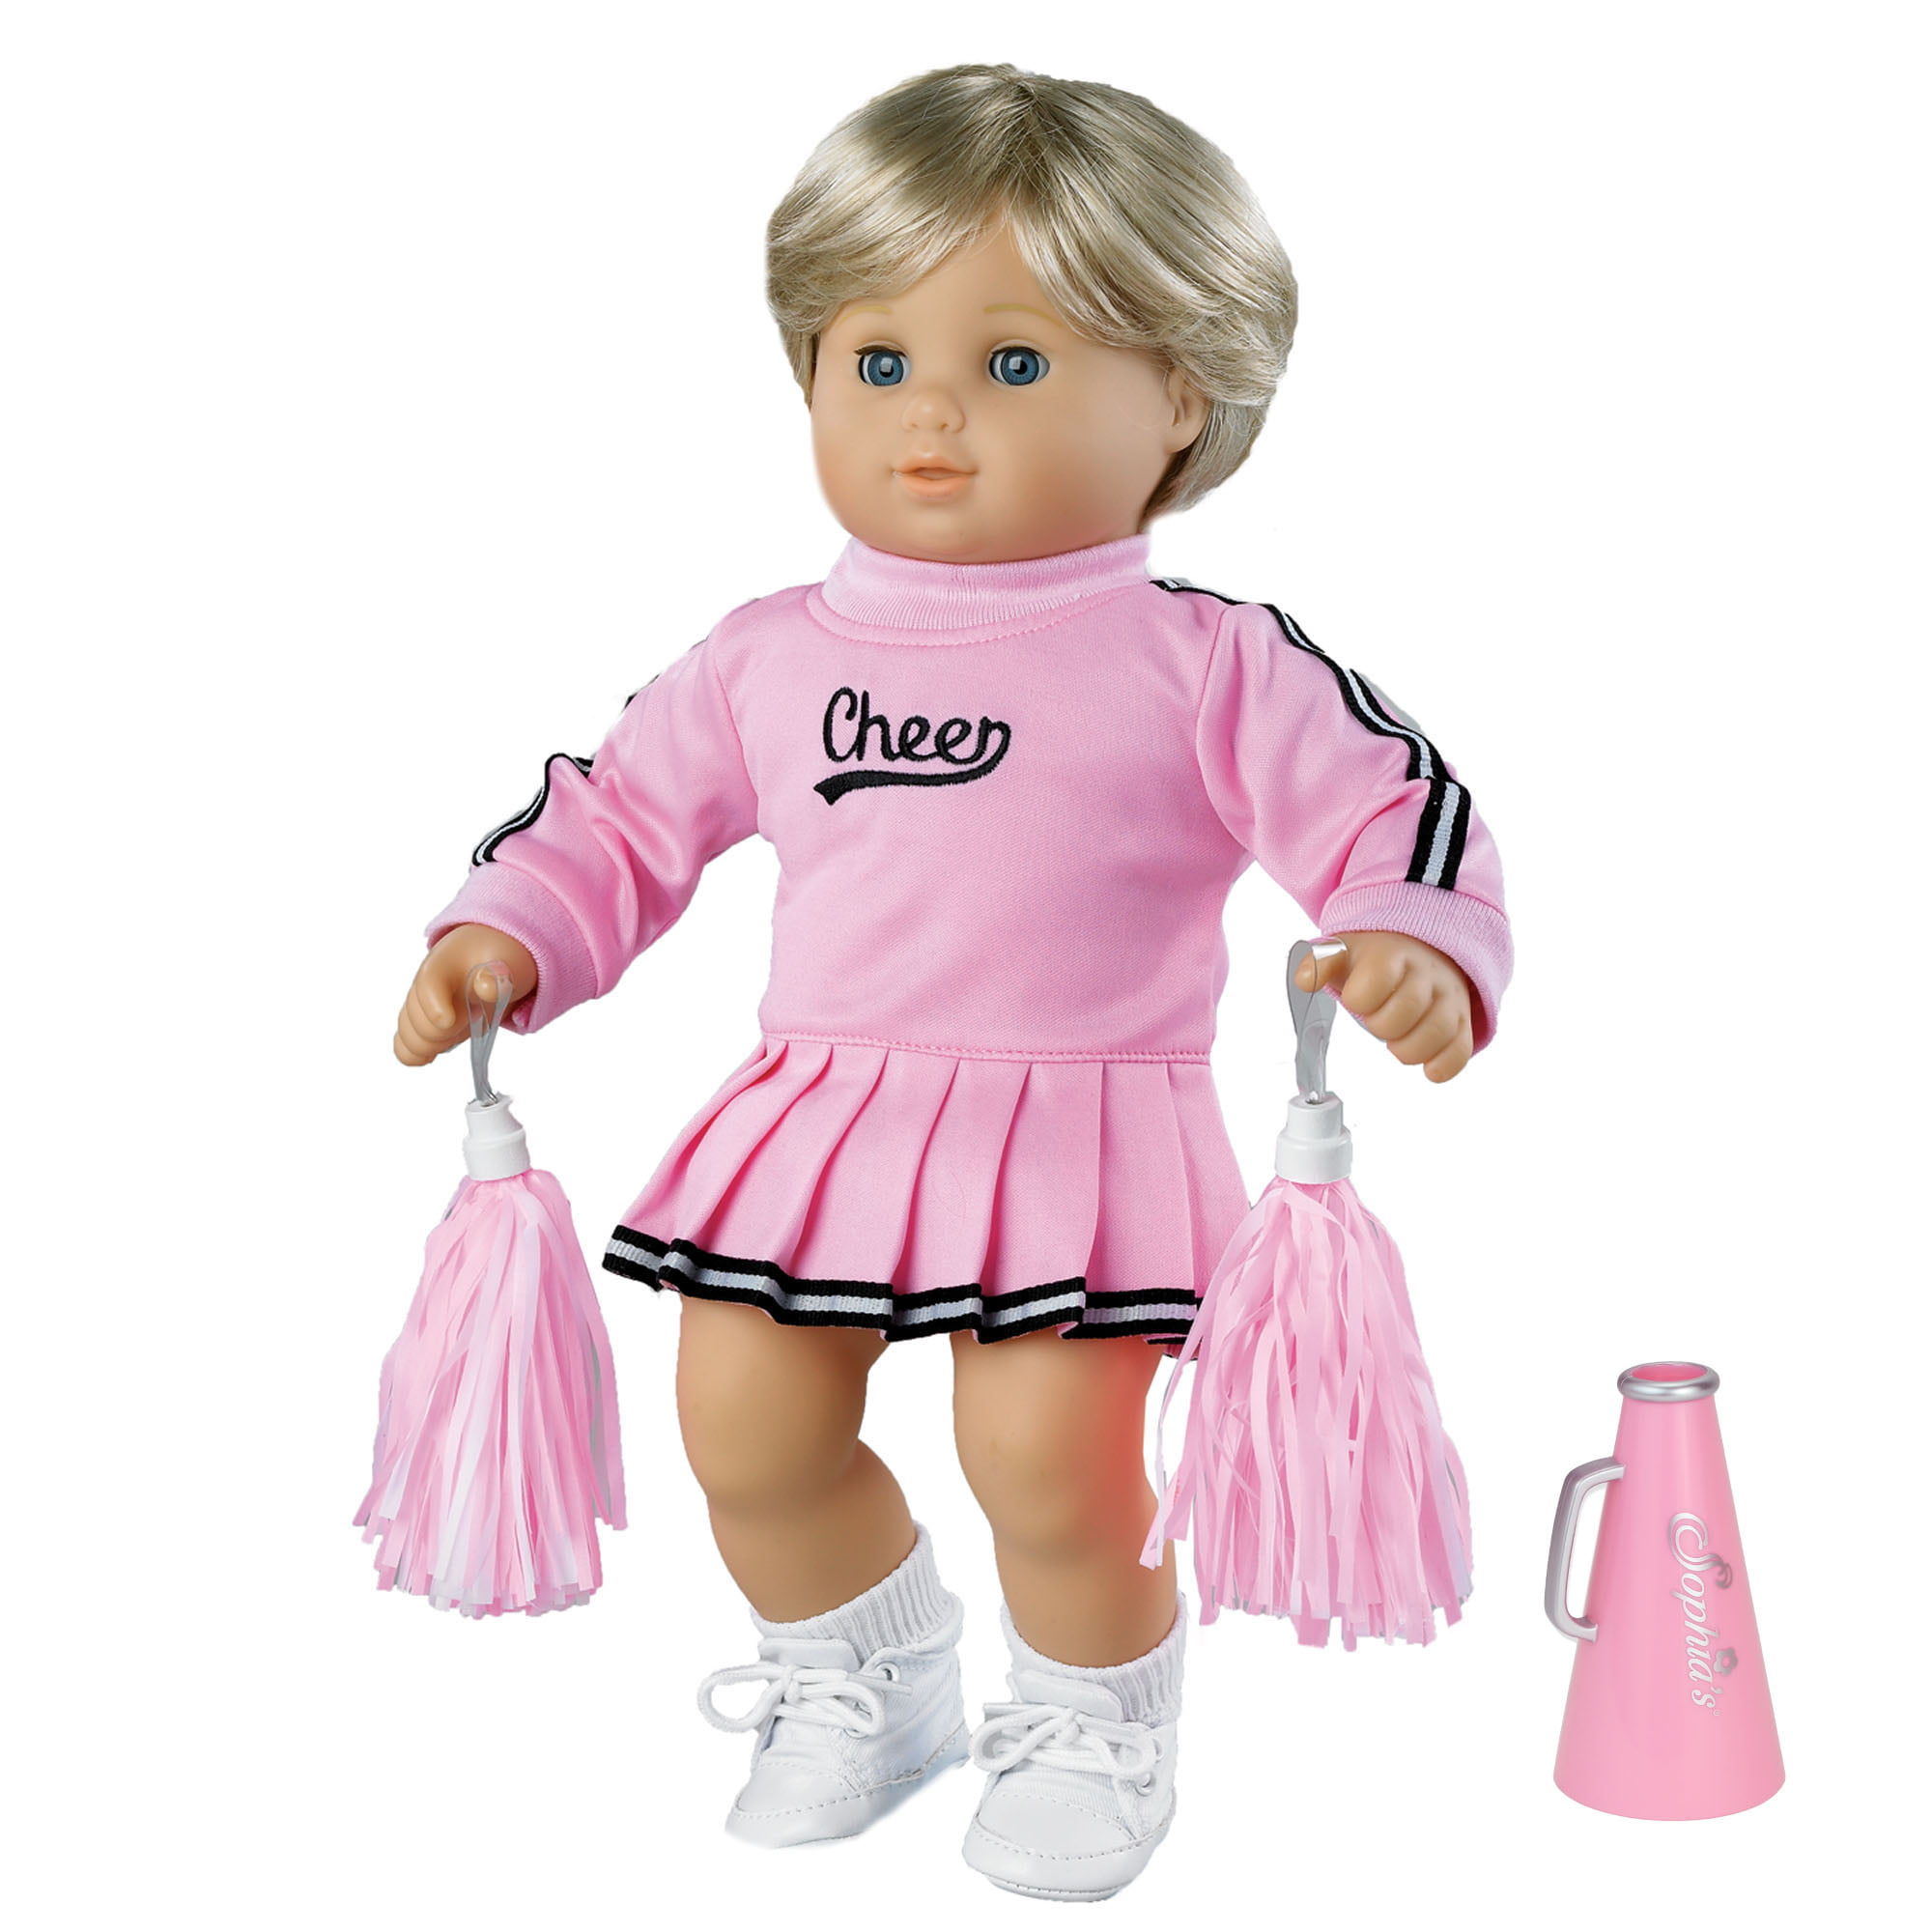 3pcs Crazy for Pink Cheerleading Outfit fits 18" American Girl Doll 